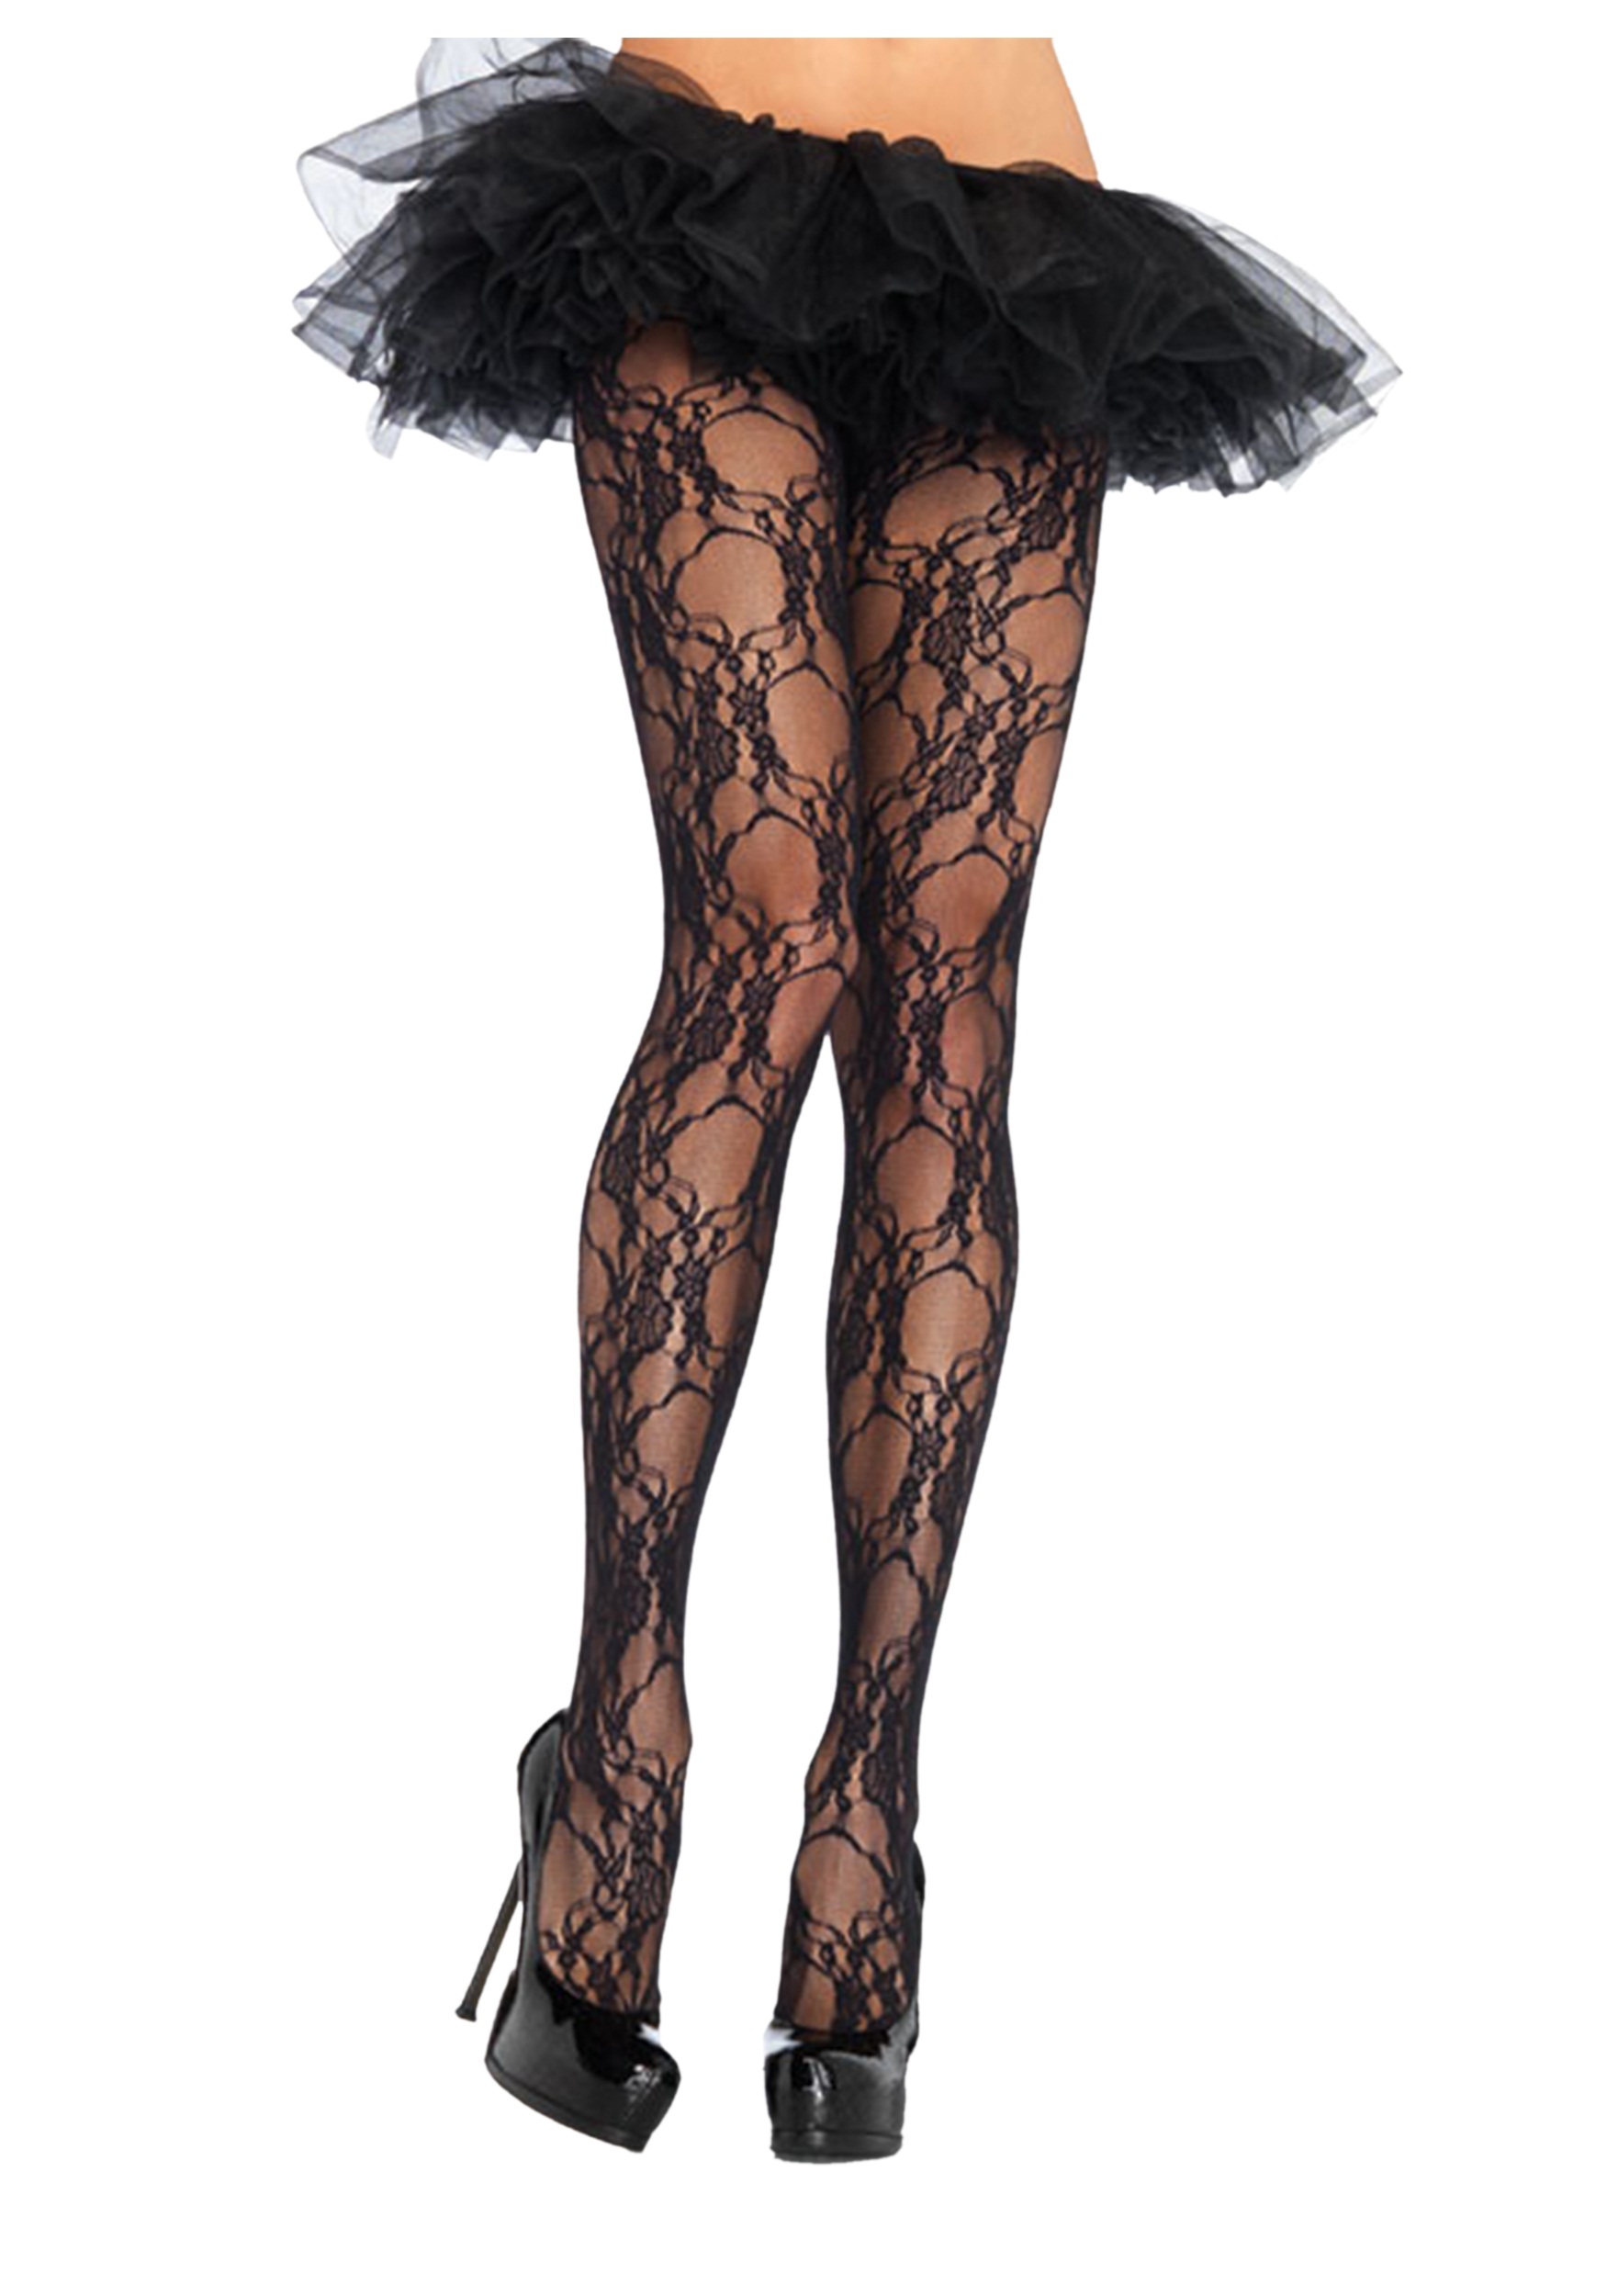 https://images.halloweencostumes.ca/products/23333/1-1/floral-pantyhose.jpg